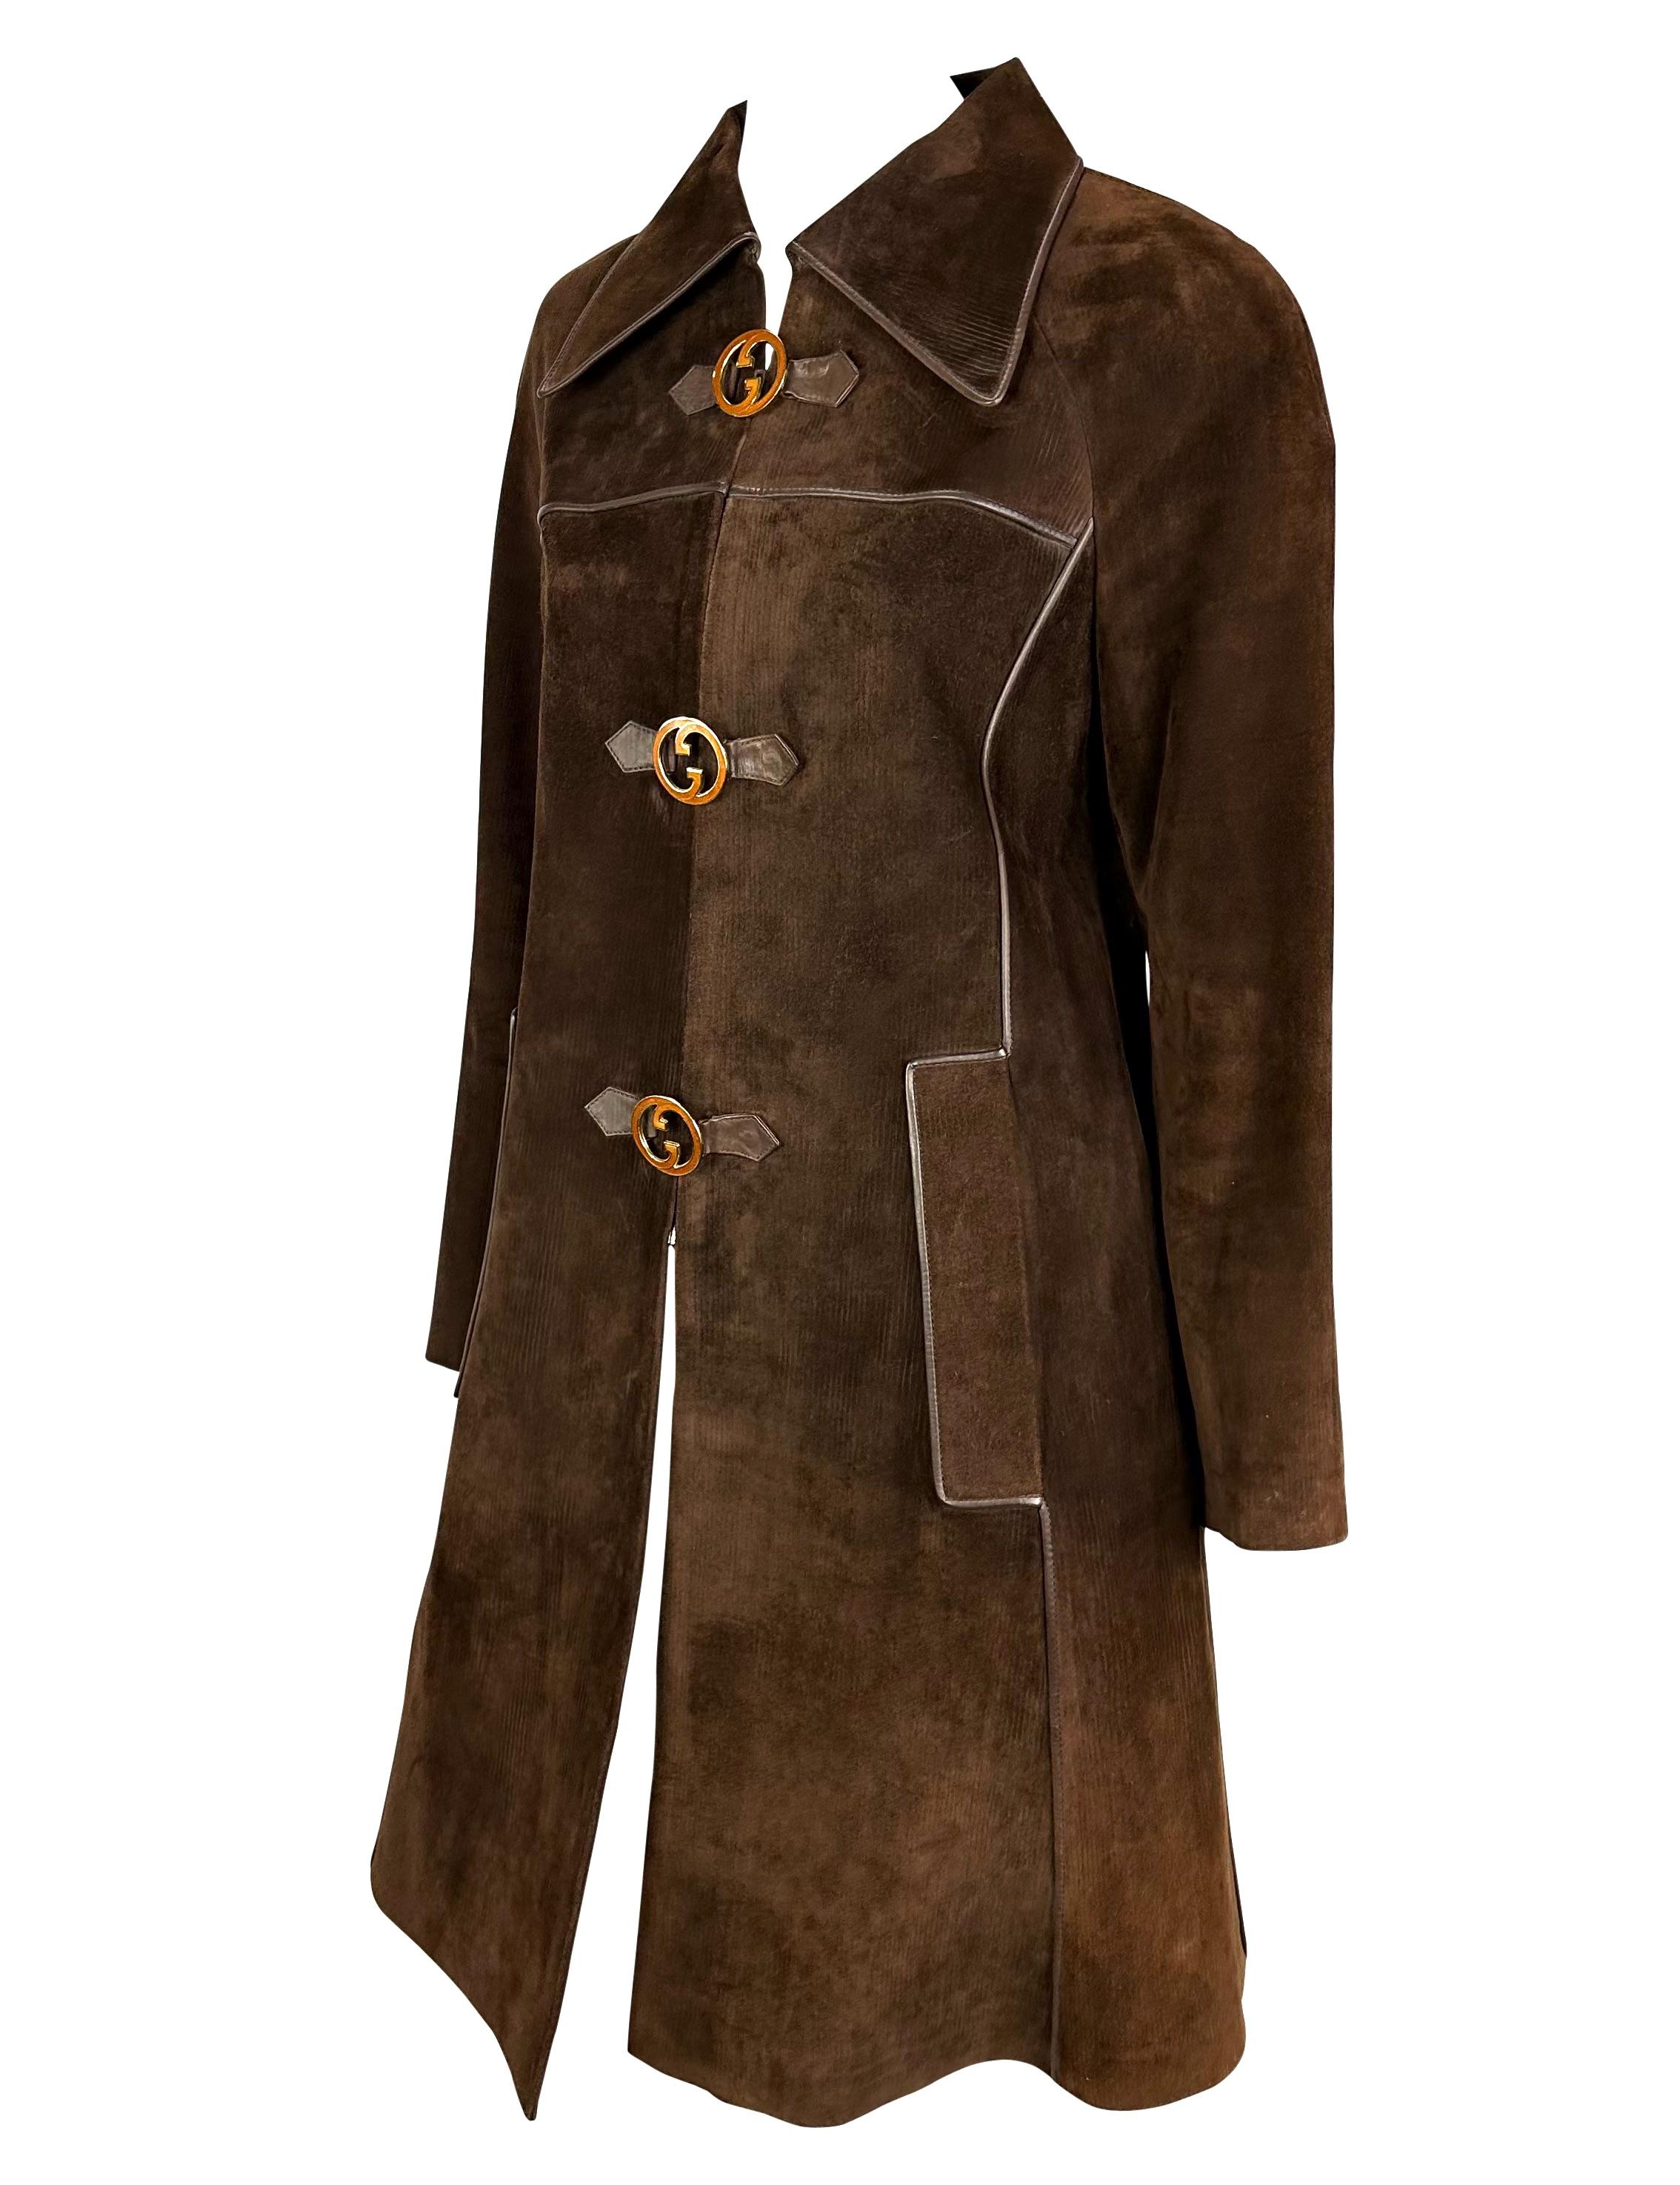 Presenting an absolutely incredible brown suede striped Gucci trench coat. From the 1970s, this ultra-rare coat is constructed entirely of patterned brown suede. The coat features leather piping, a large collar, and is made complete with large